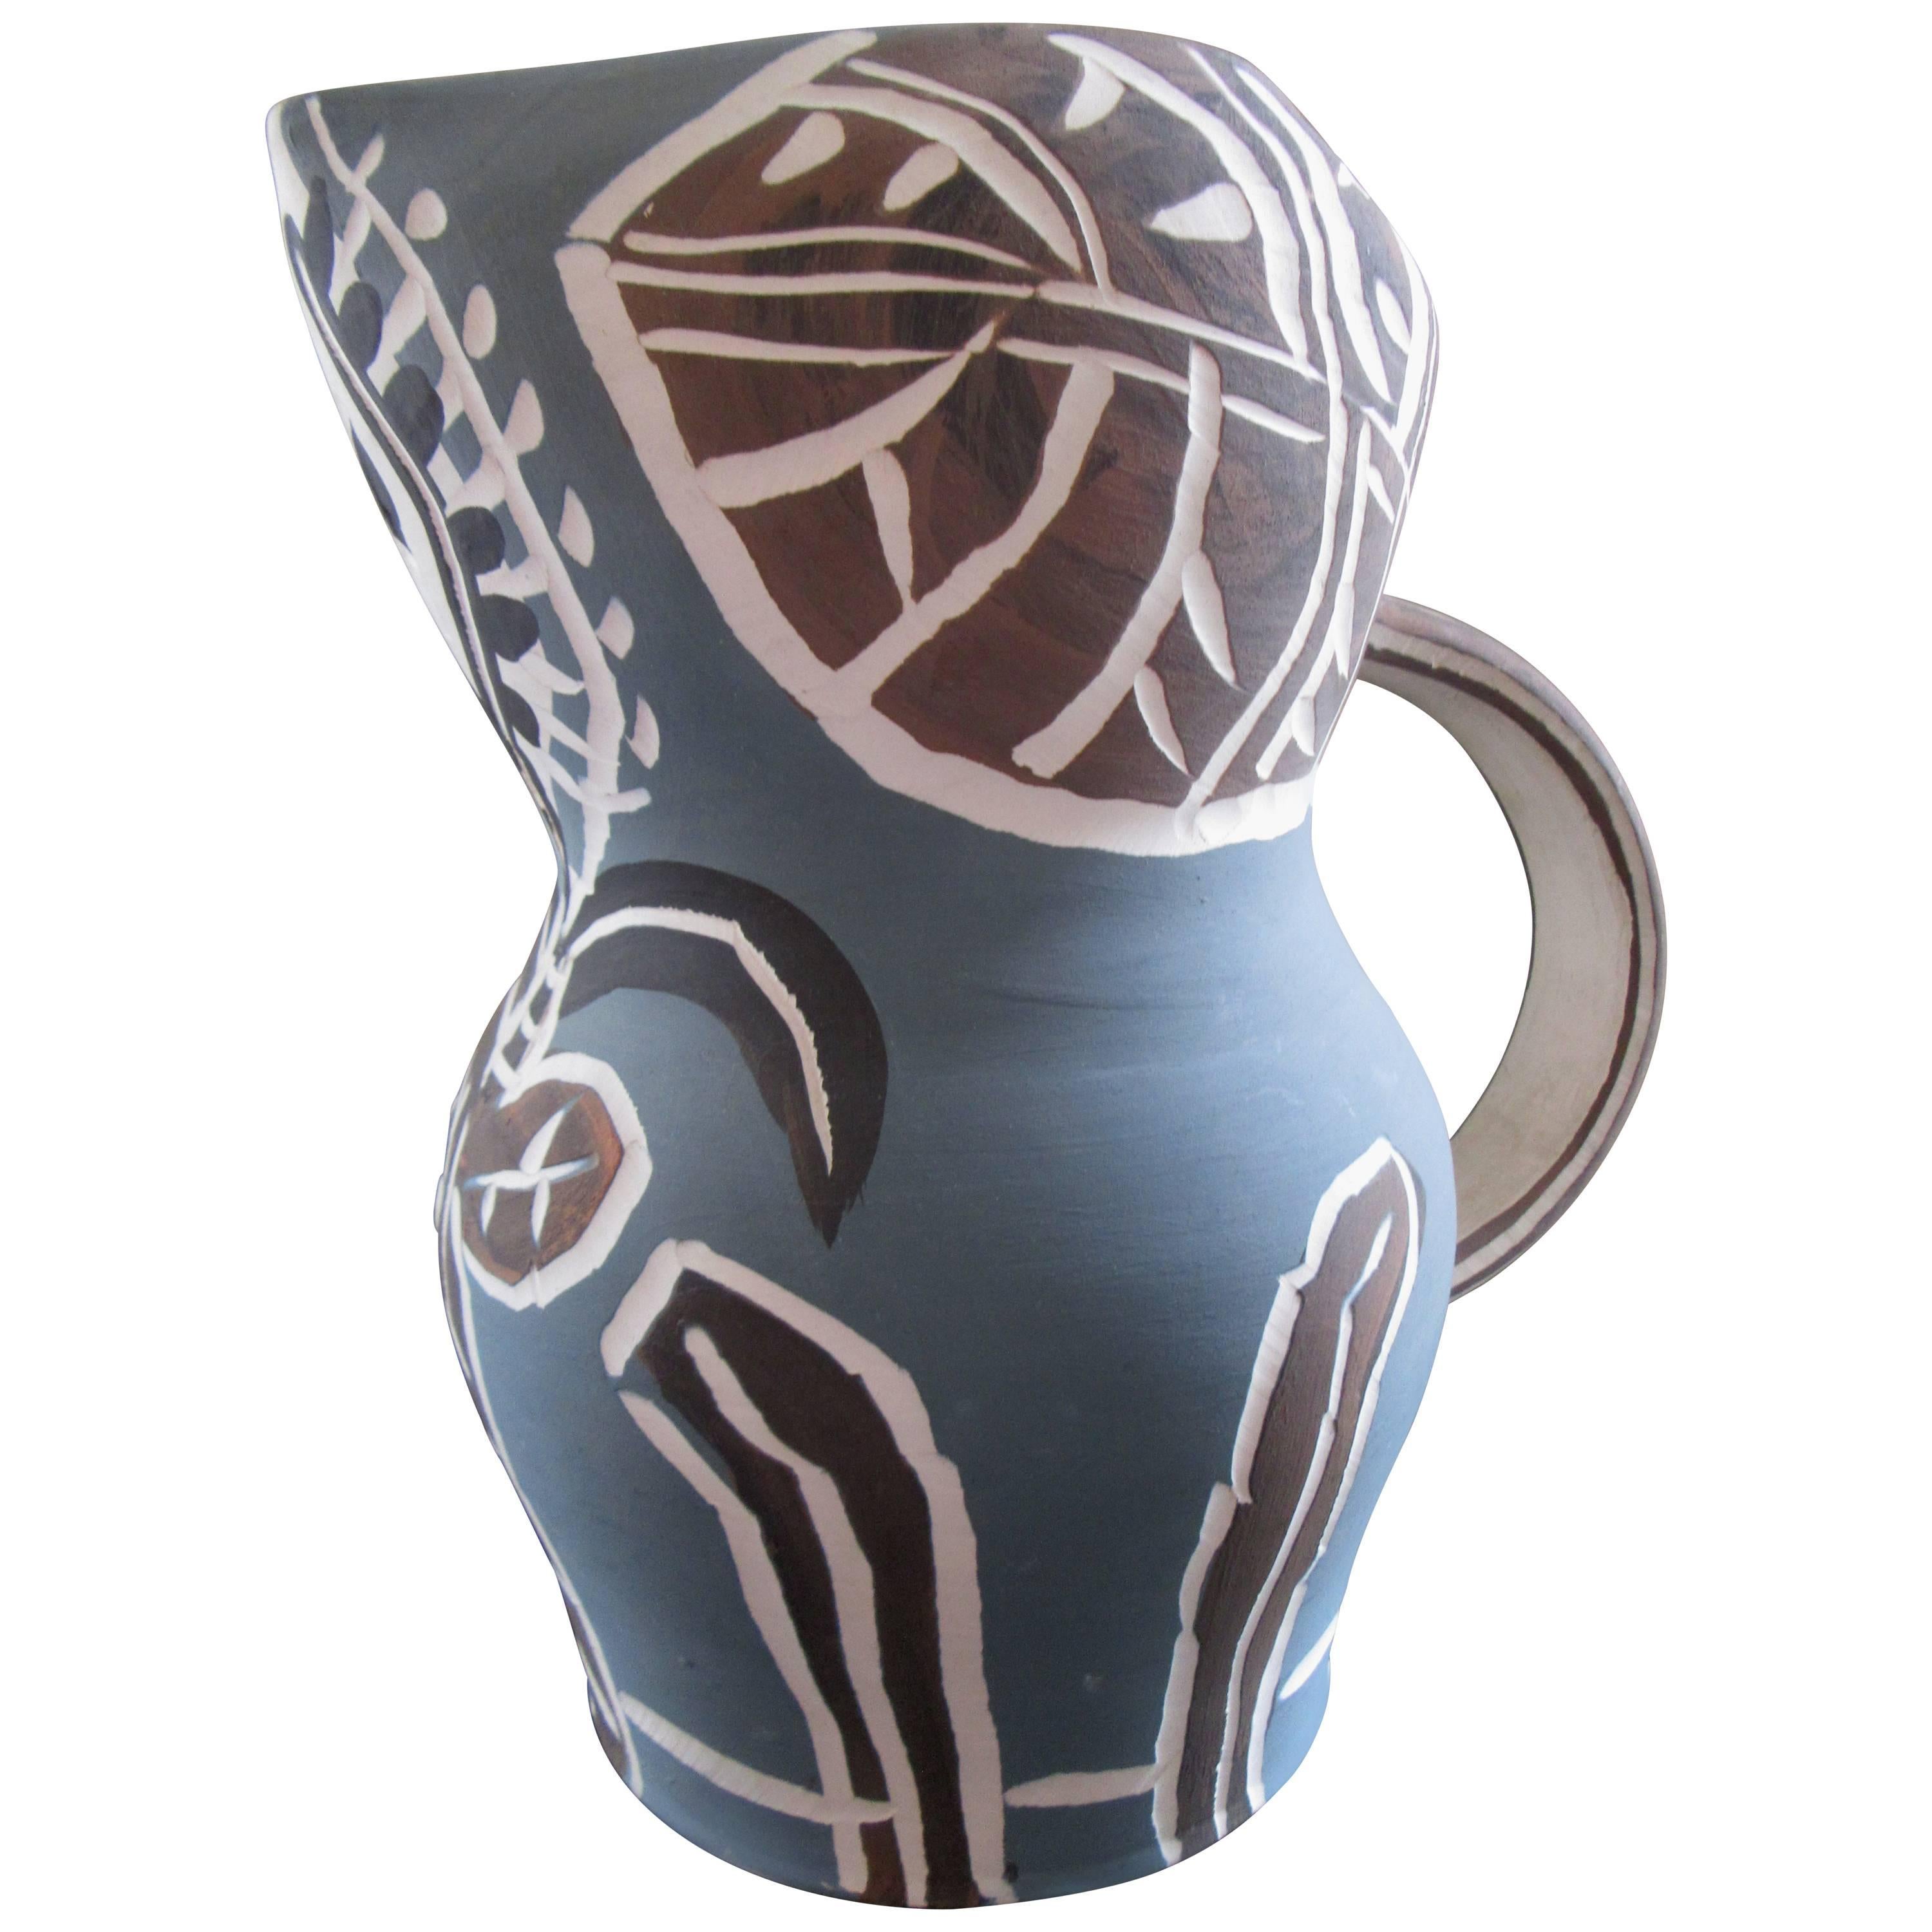 Pablo Picasso Madoura Collection Earthenware Pitcher